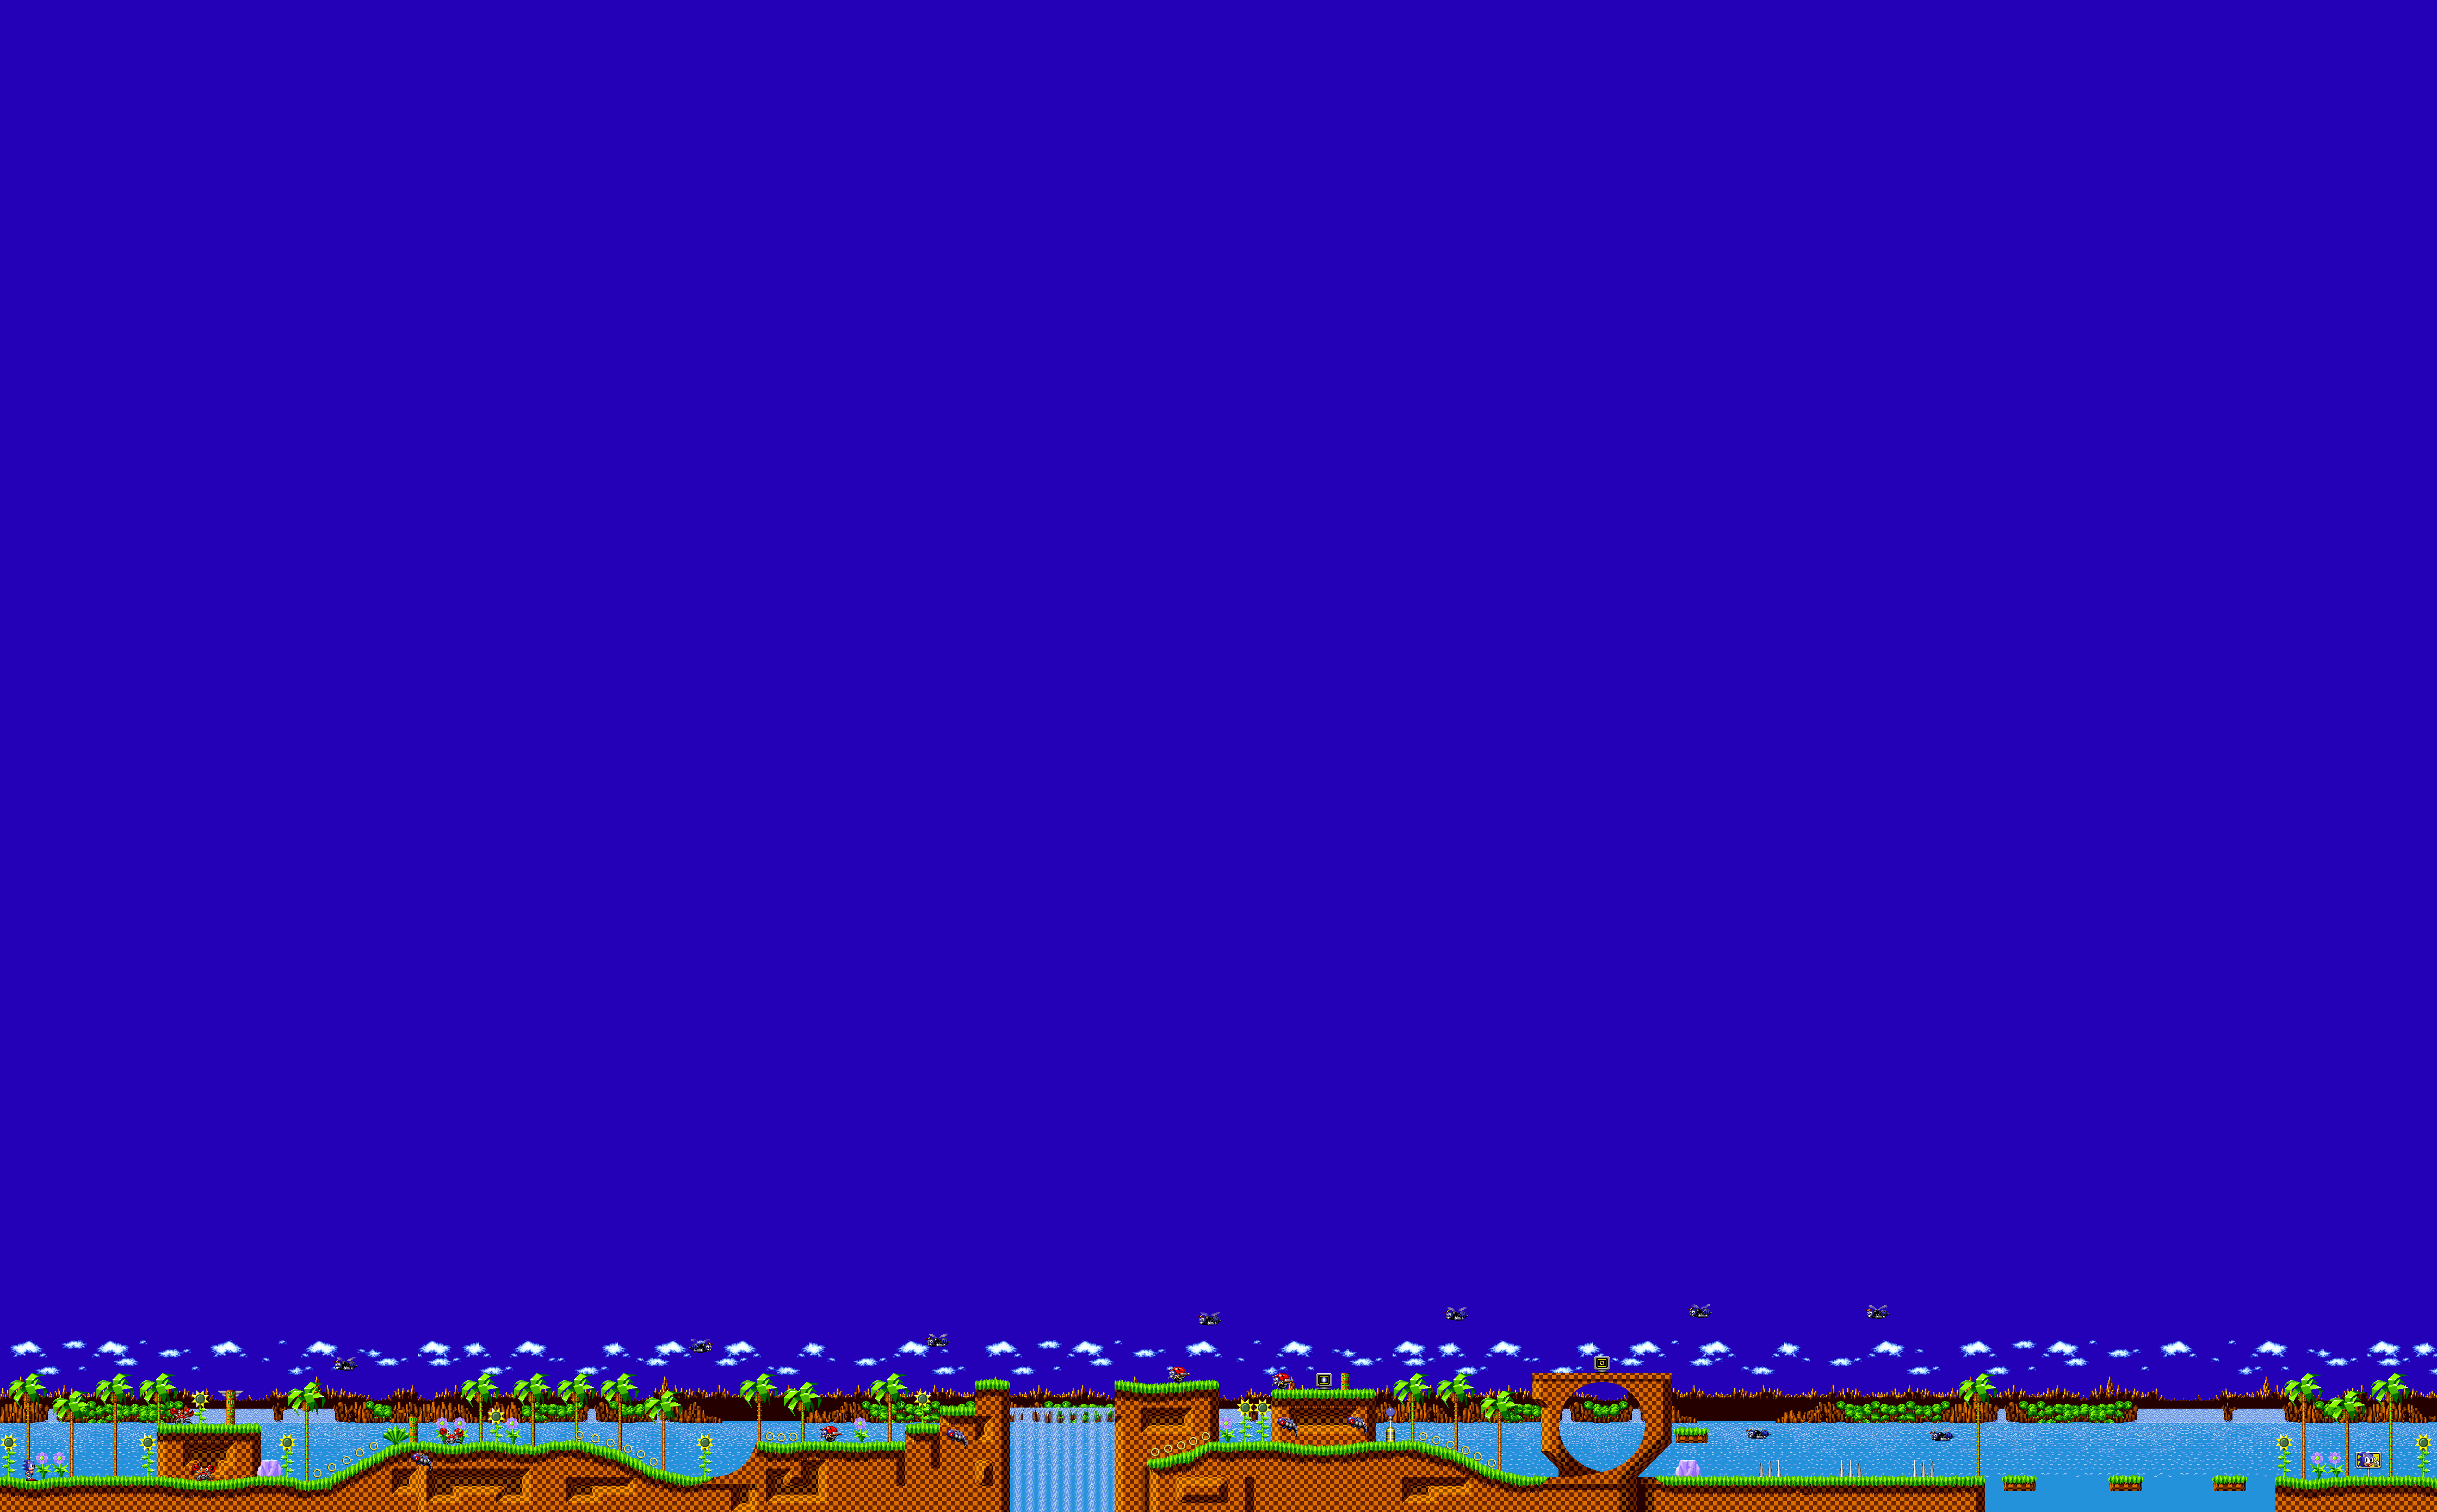 Sonic the Hedgehog (1991) Wallpapers